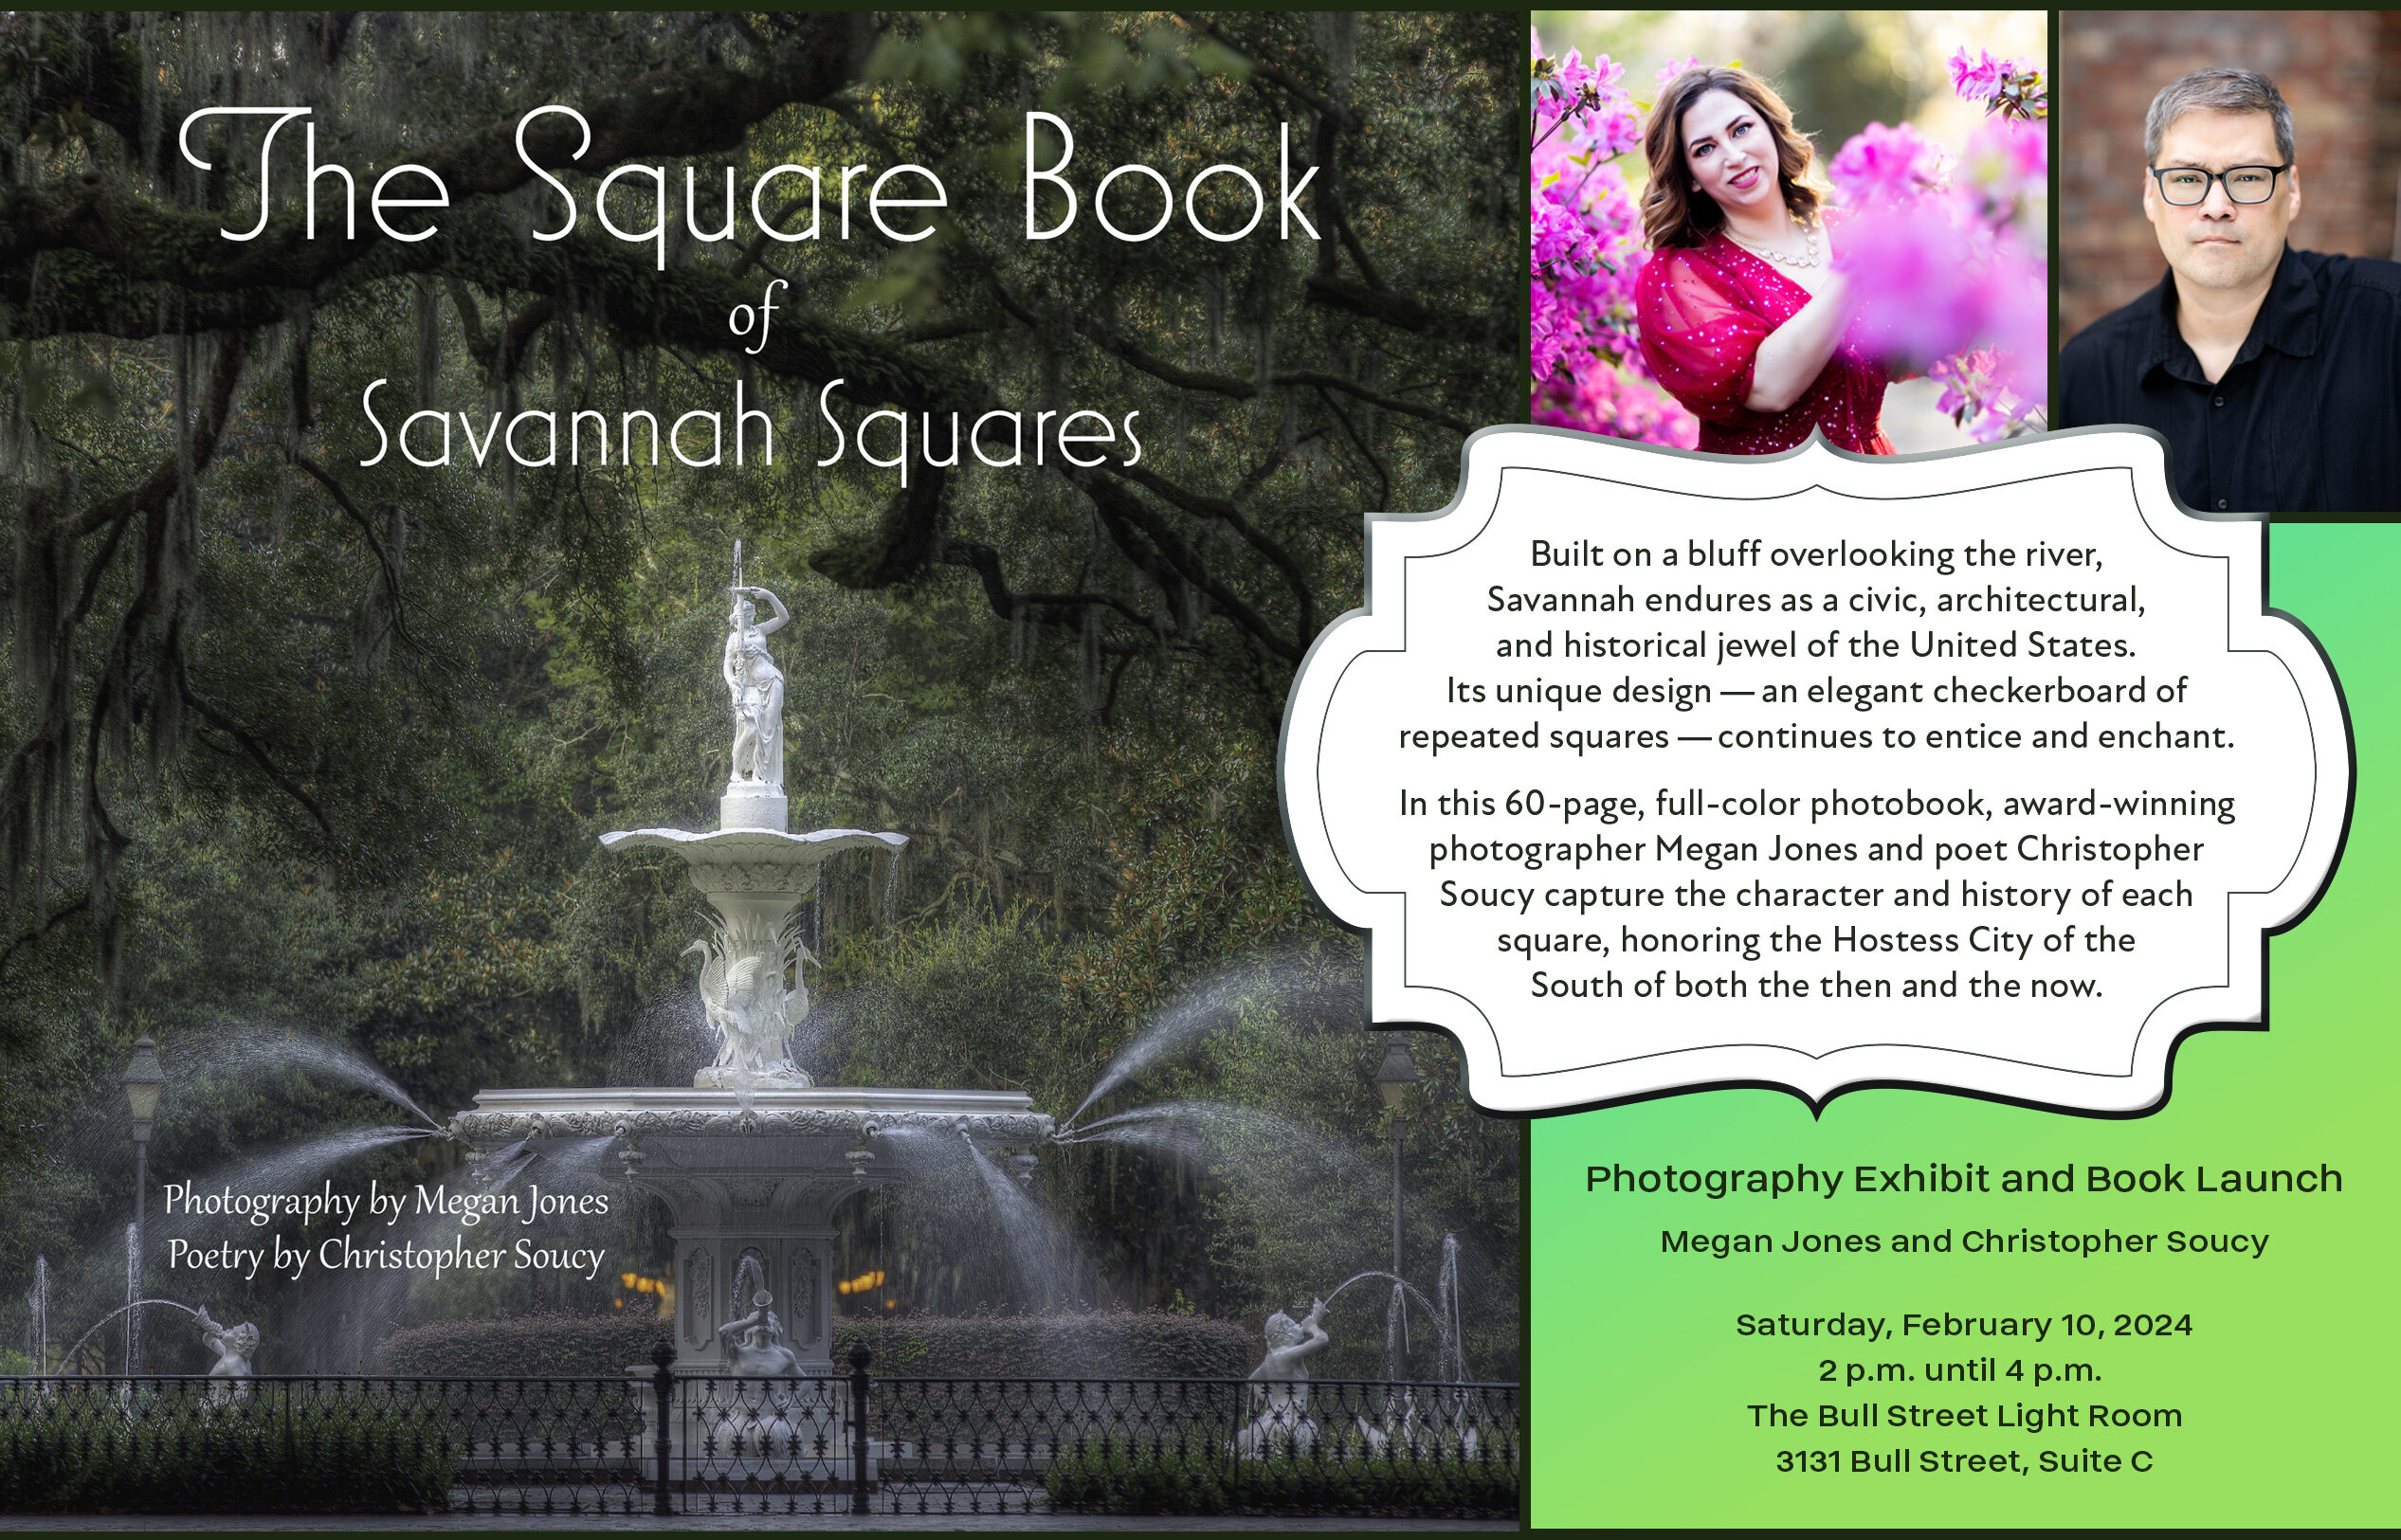 Gallery Exhibit and Book Signing for The Square Book of Savannah Squares at The Bull Street Light Room on Saturday, February 10, 2-4 p.m.